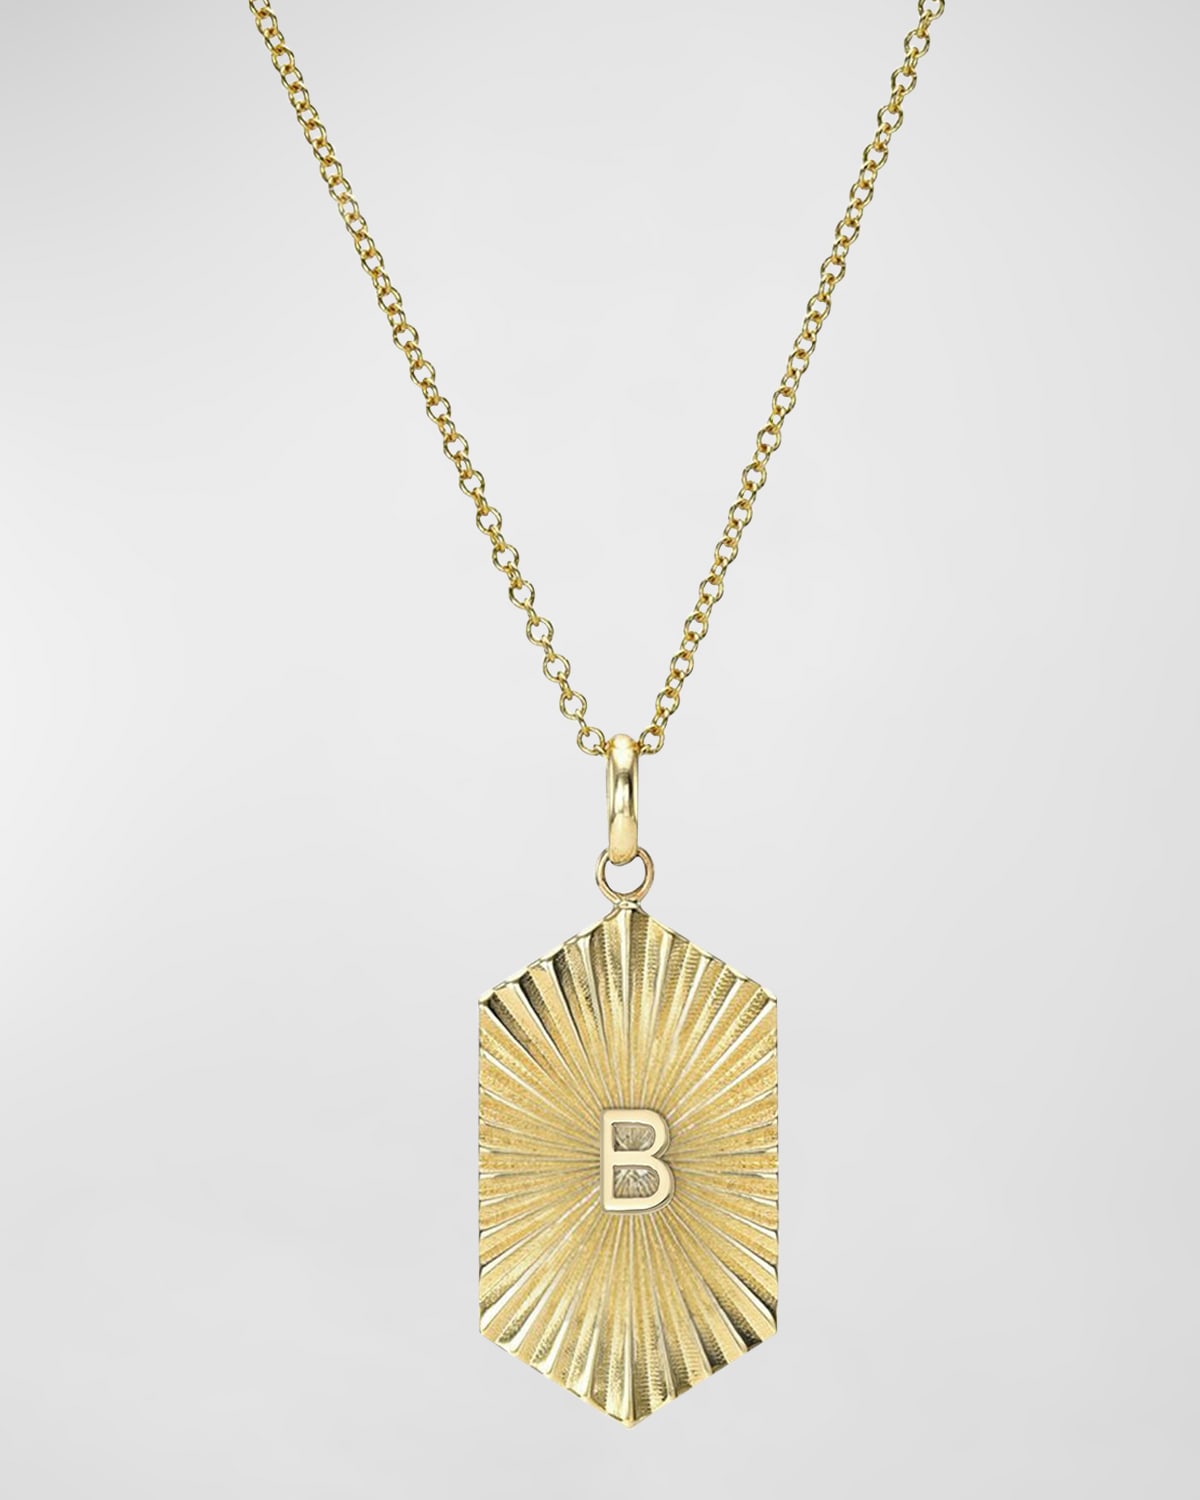 Zoe Lev Jewelry 14k Gold Pleated Shield With Initial Necklace In B